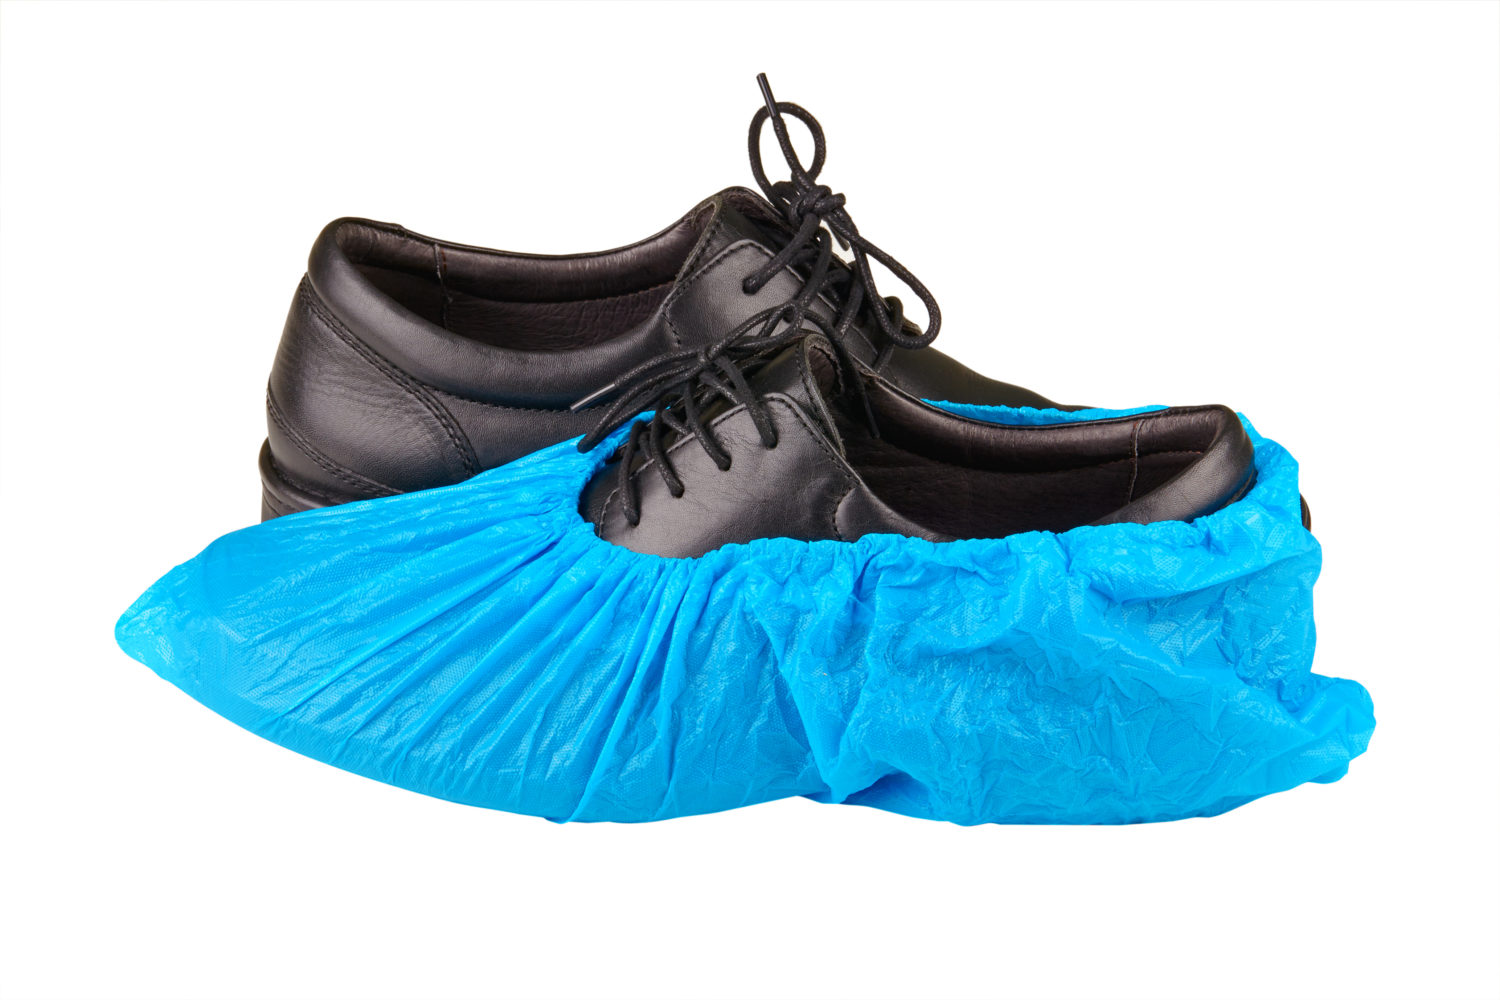 Black medical shoes with blue protective covers.